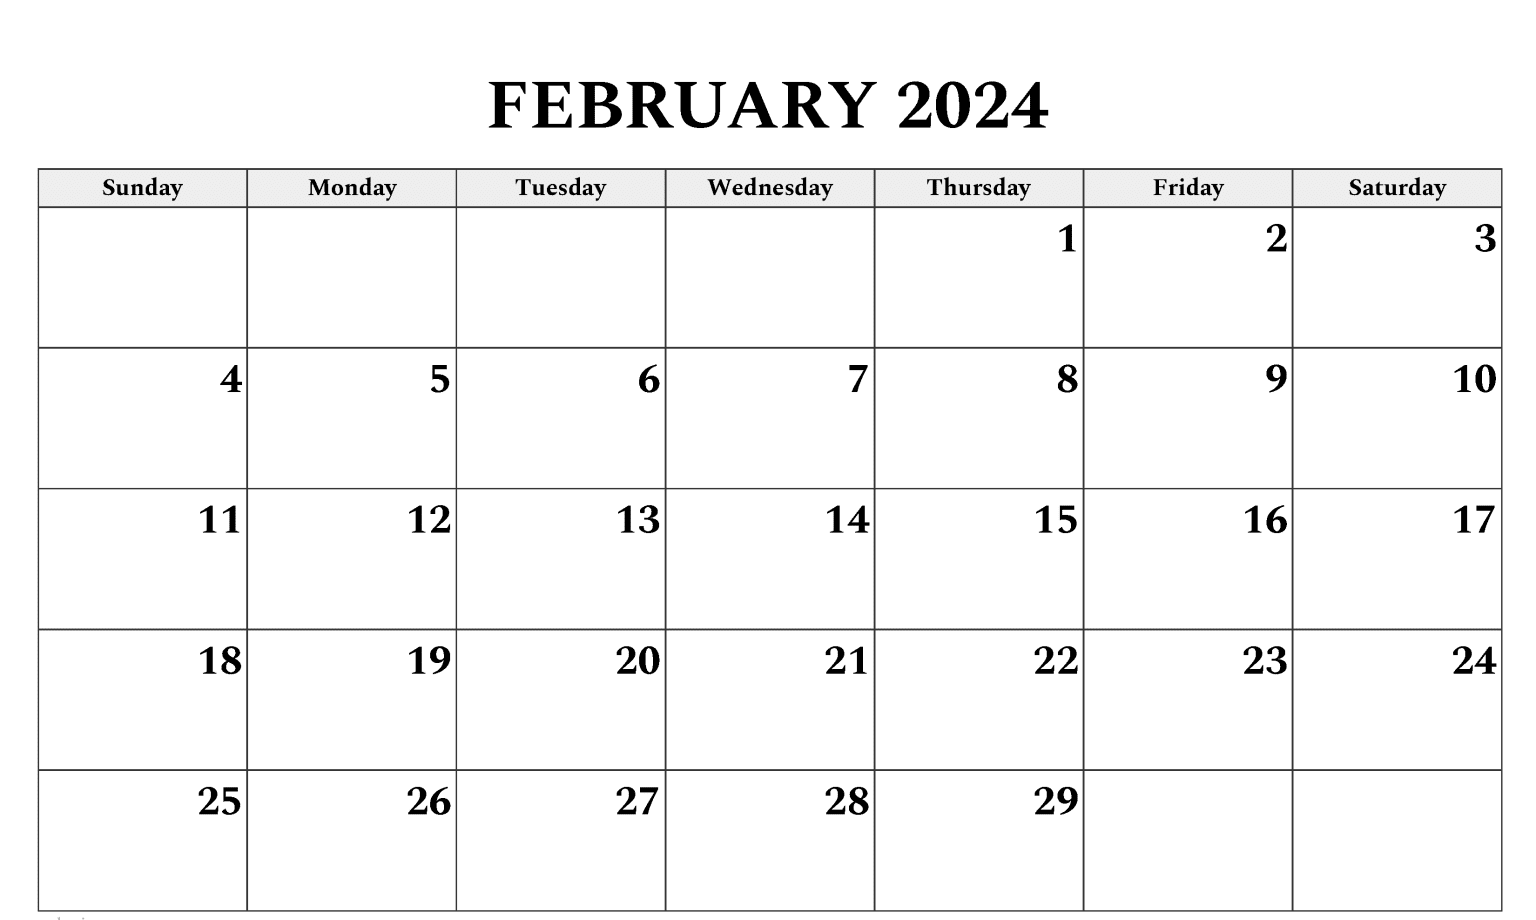 February 2024 Calendar Template in PDF, Word, Excel formats